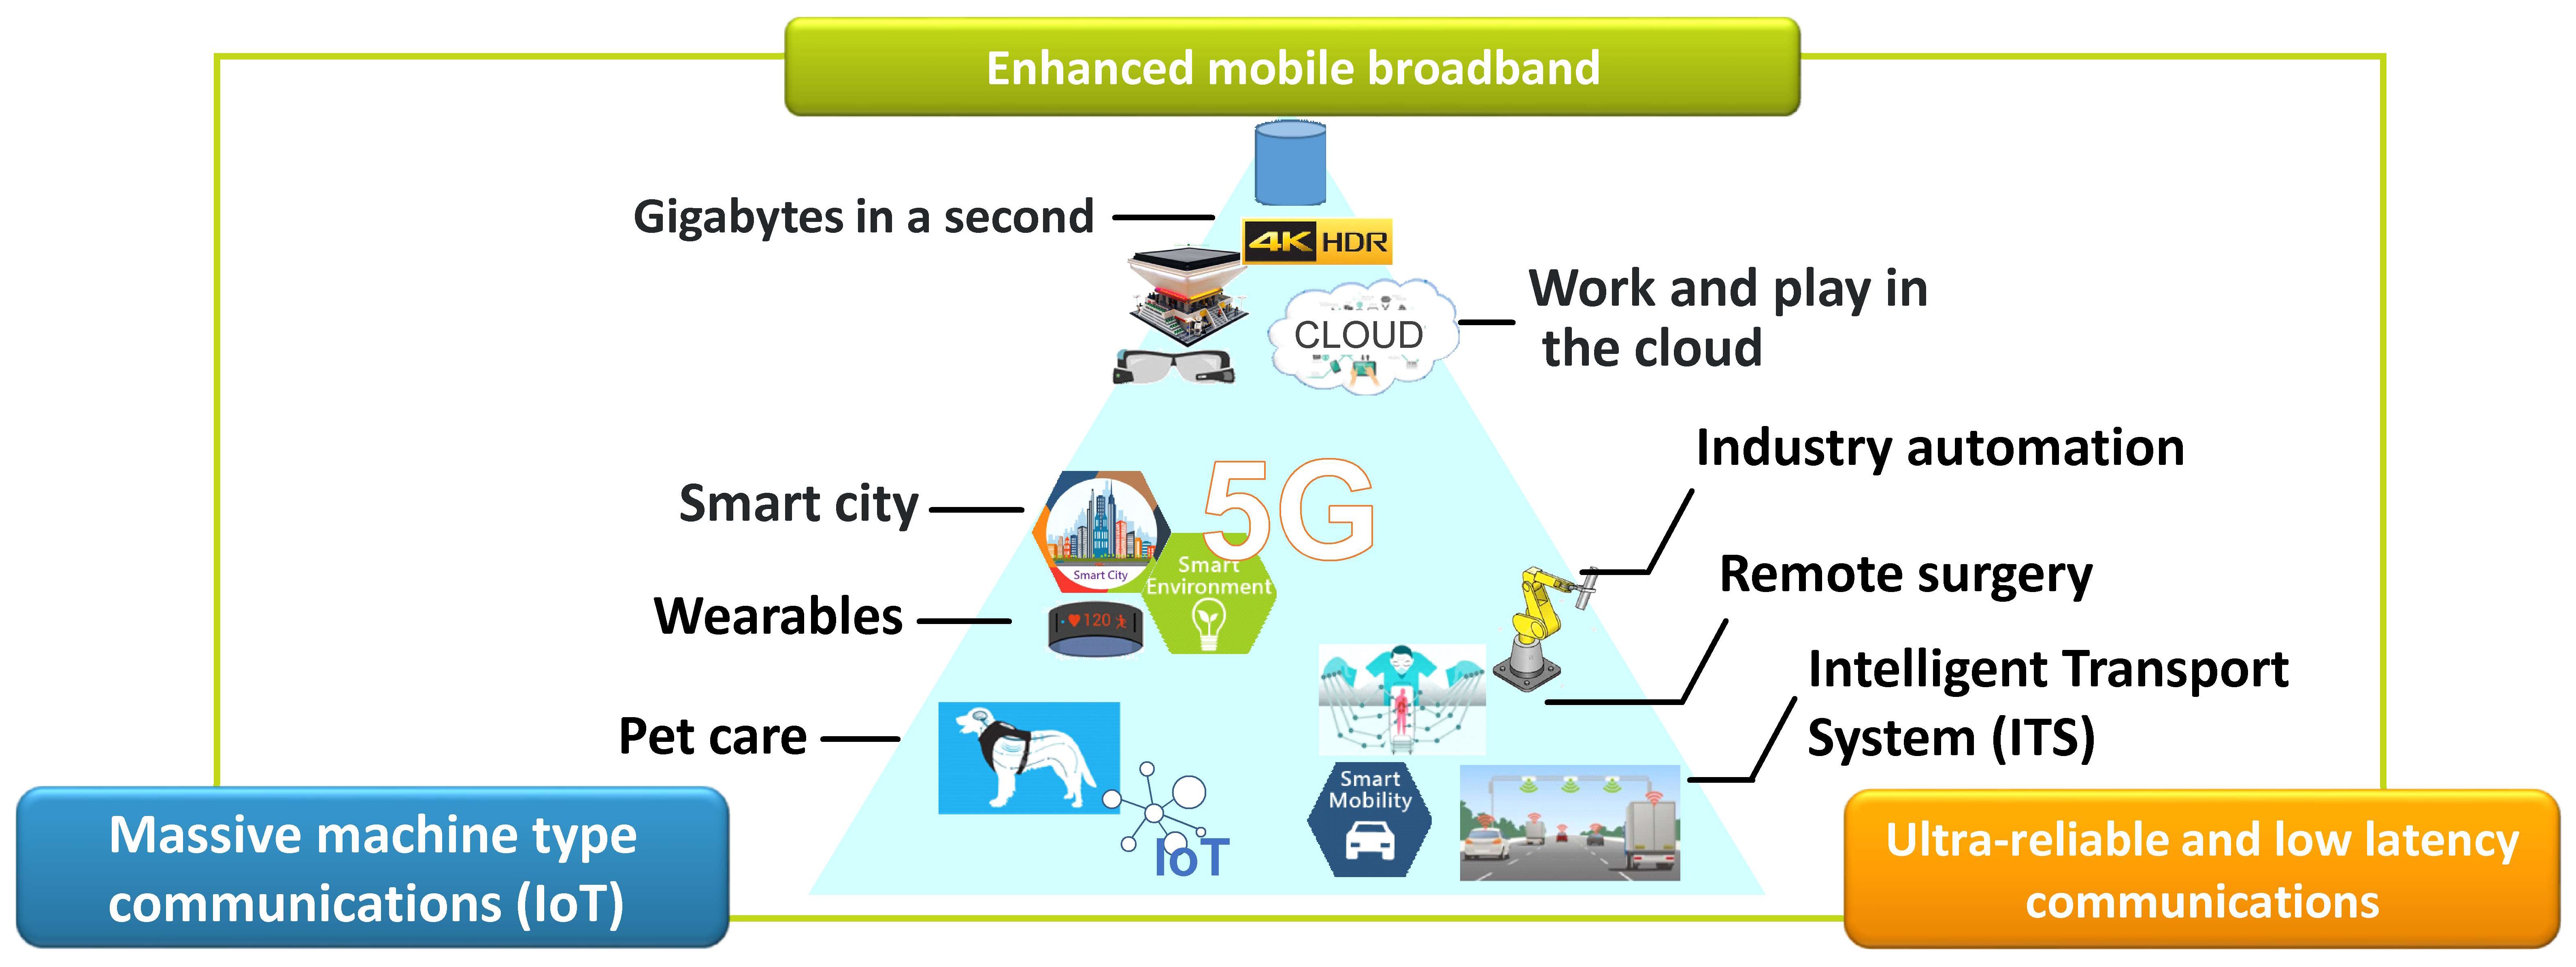 Figure - Applications of 5G technology